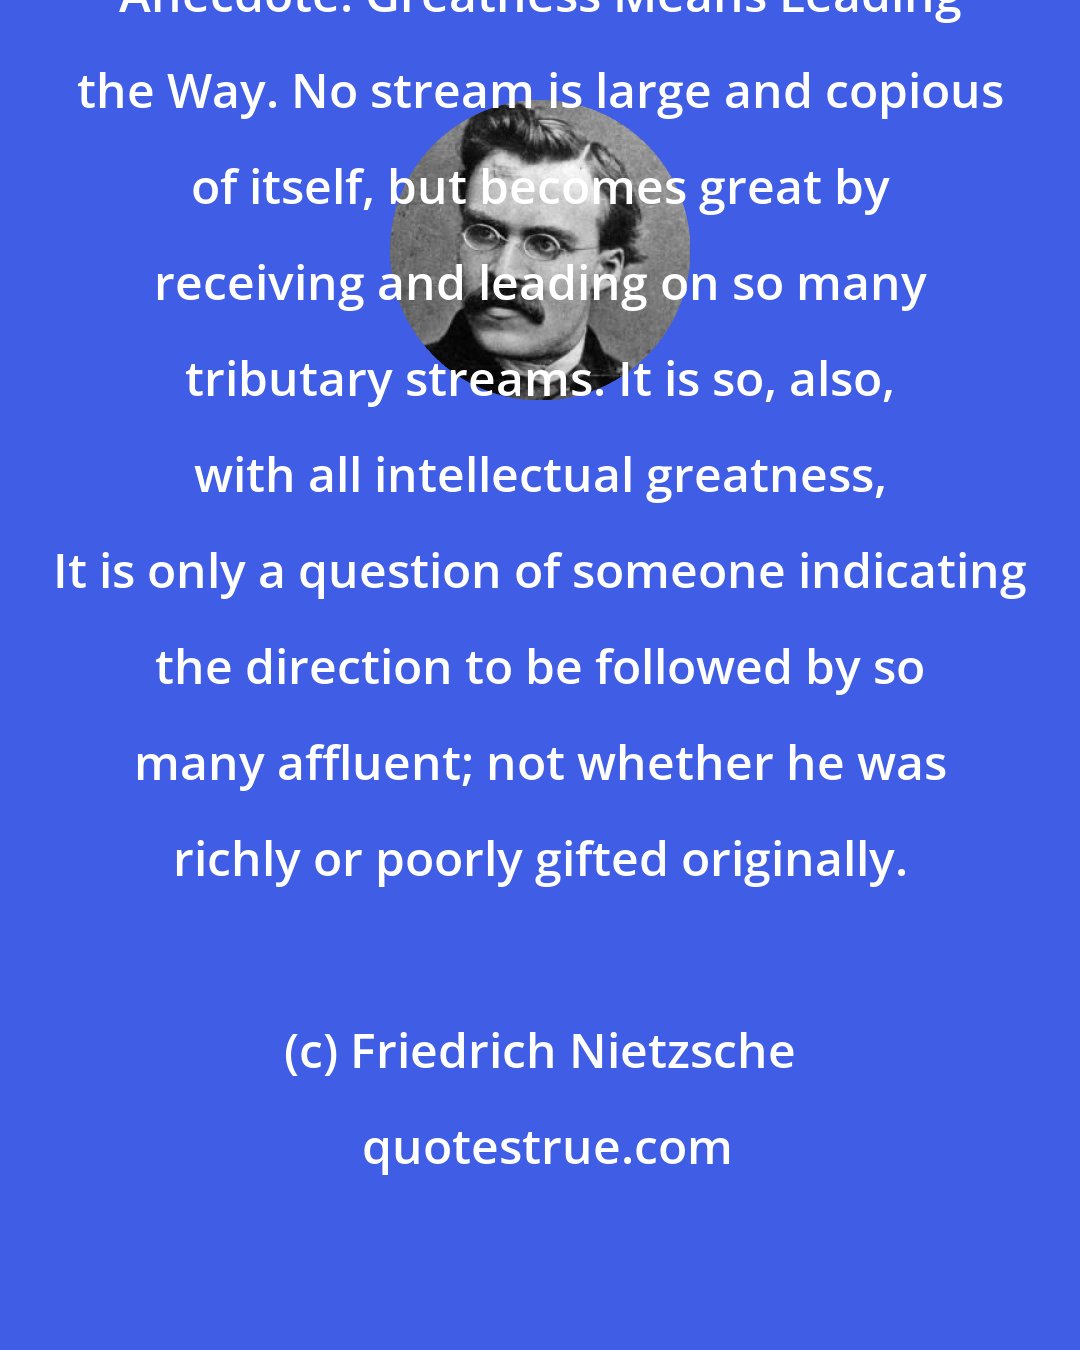 Friedrich Nietzsche: Anecdote: Greatness Means Leading the Way. No stream is large and copious of itself, but becomes great by receiving and leading on so many tributary streams. It is so, also, with all intellectual greatness, It is only a question of someone indicating the direction to be followed by so many affluent; not whether he was richly or poorly gifted originally.